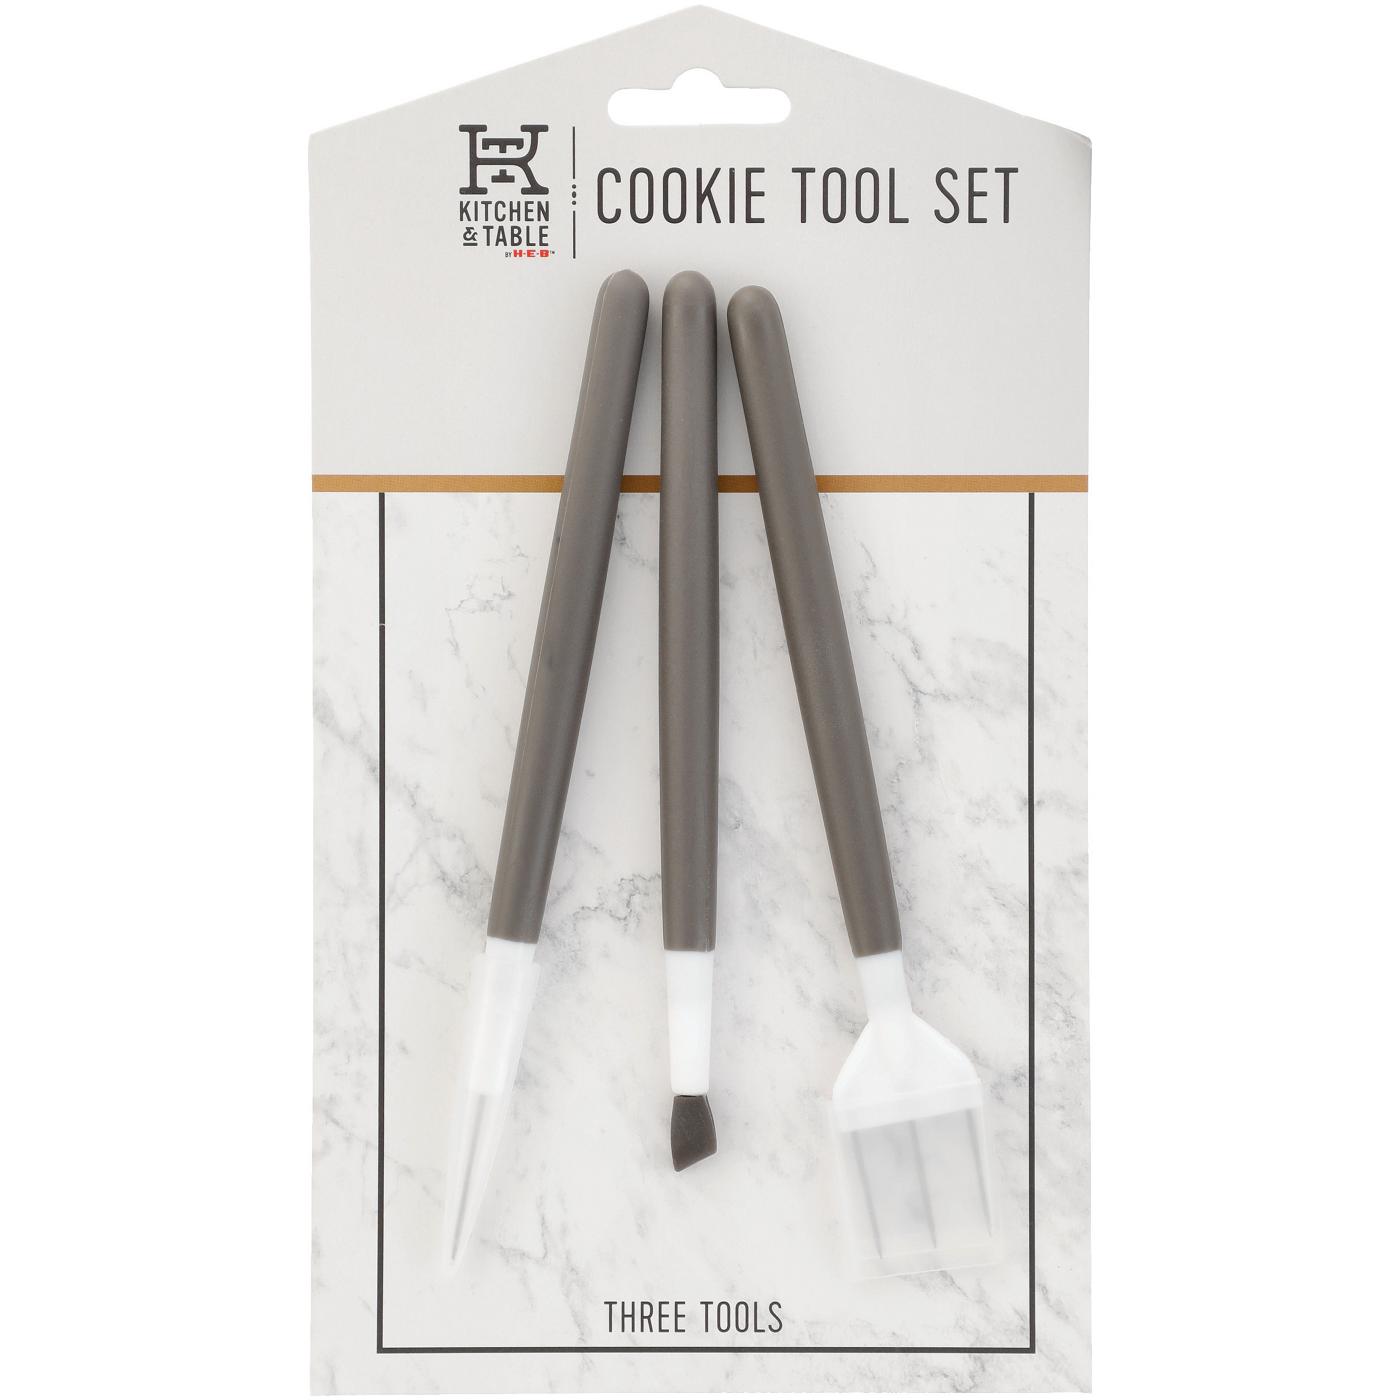 Kitchen & Table by H-E-B Cookie Tool Set; image 1 of 2